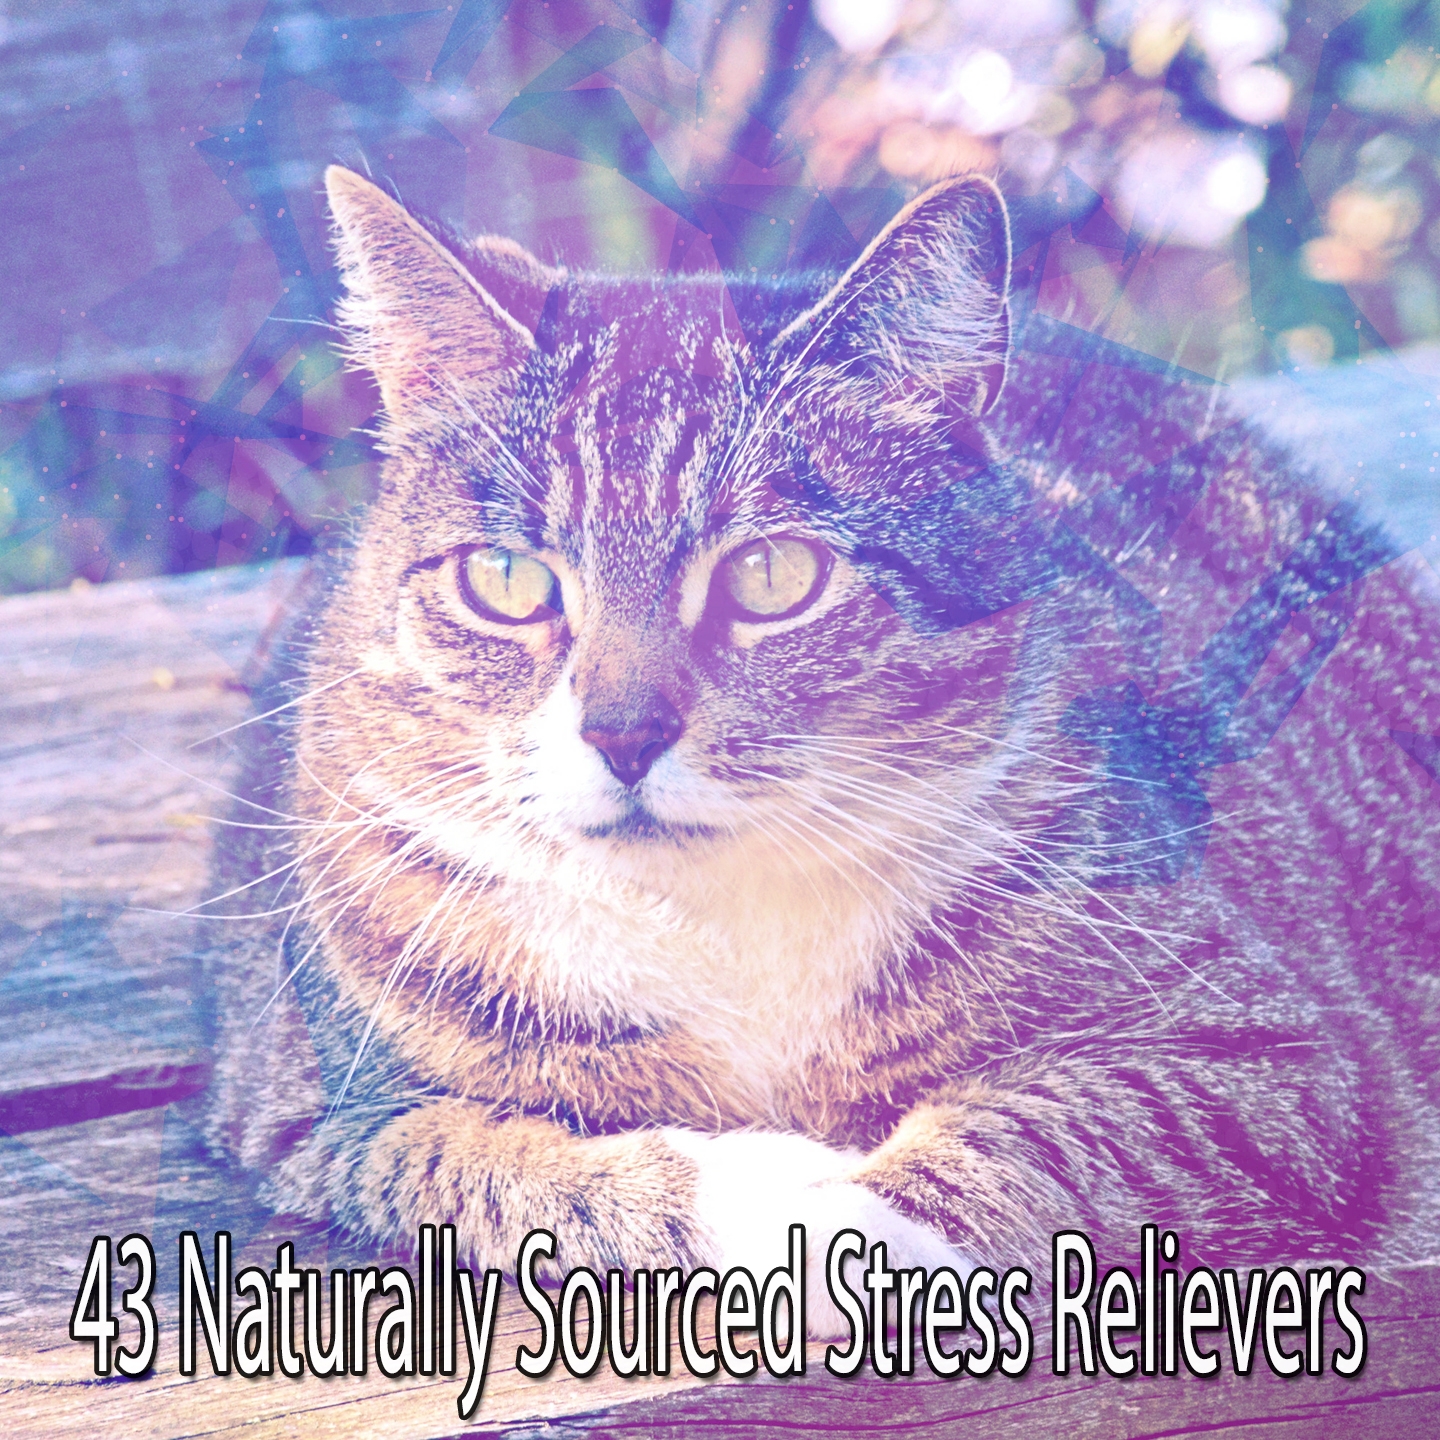 43 Naturally Sourced Stress Relievers